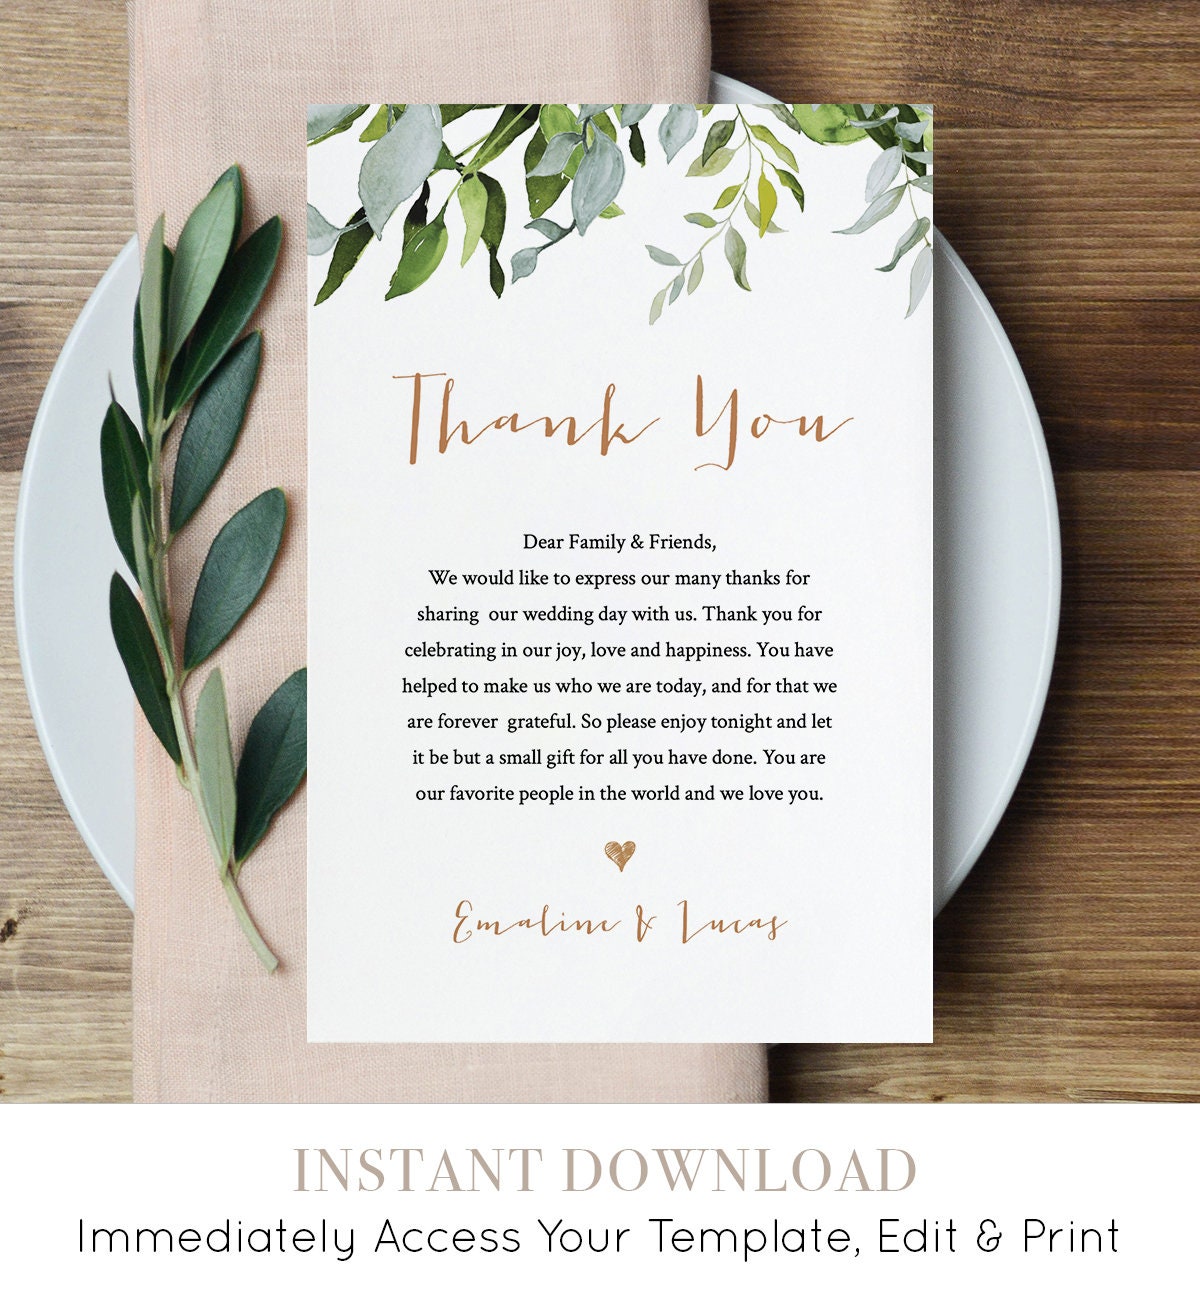 thank-you-letter-template-wedding-reception-thank-you-note-instant